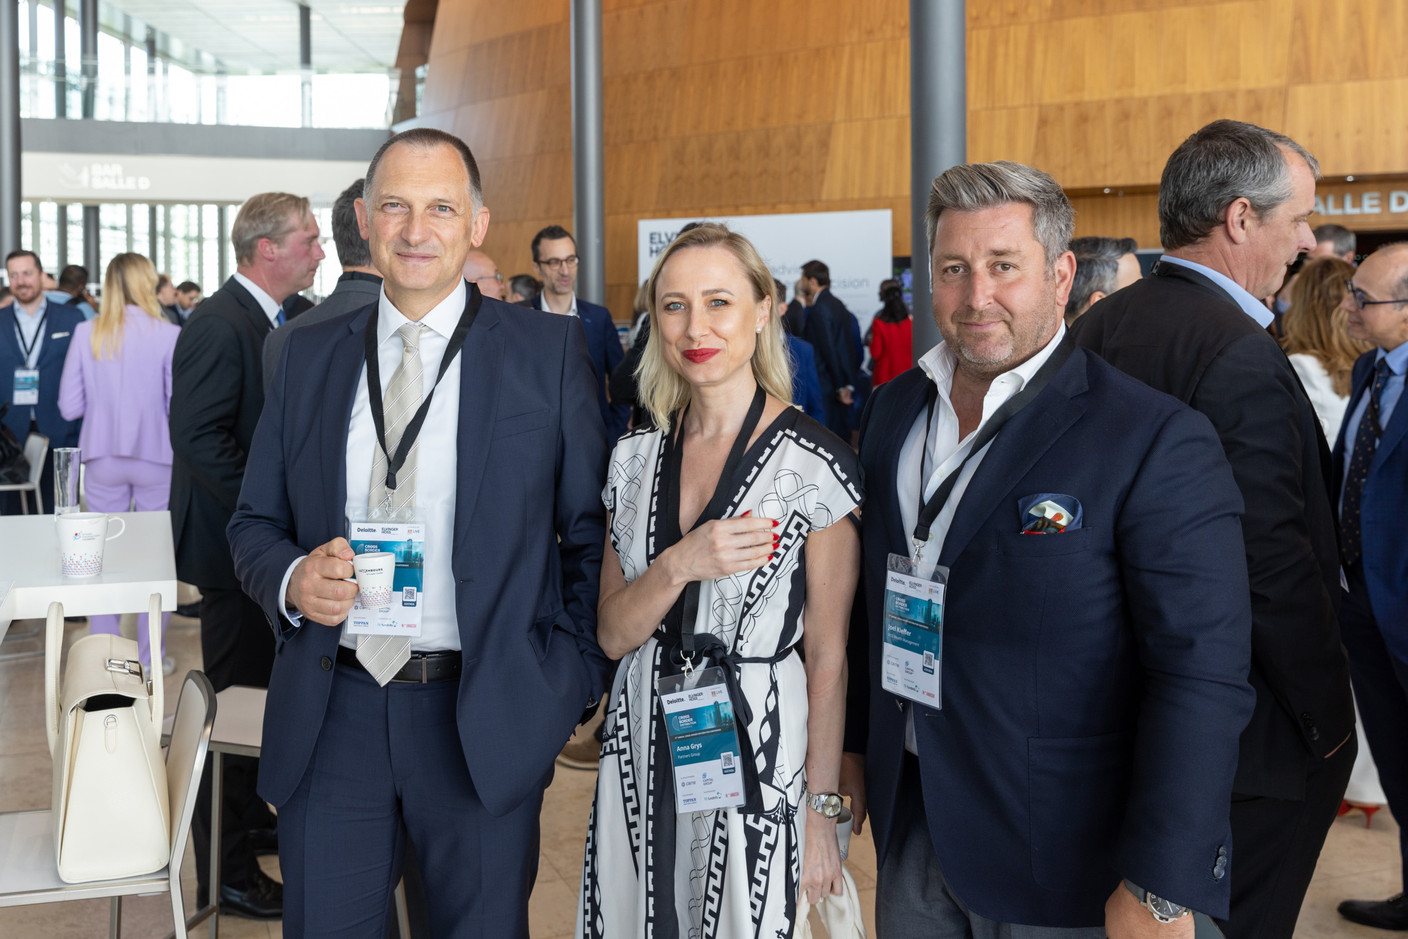 Anna Grys (Partners Group), Joel Kieffer (BOS Wealth Management) at the Cross-Border Distribution Conference held at the European Convention Center in Kirchberg on 25 May. Photo: Romain Gamba/Maison Moderne